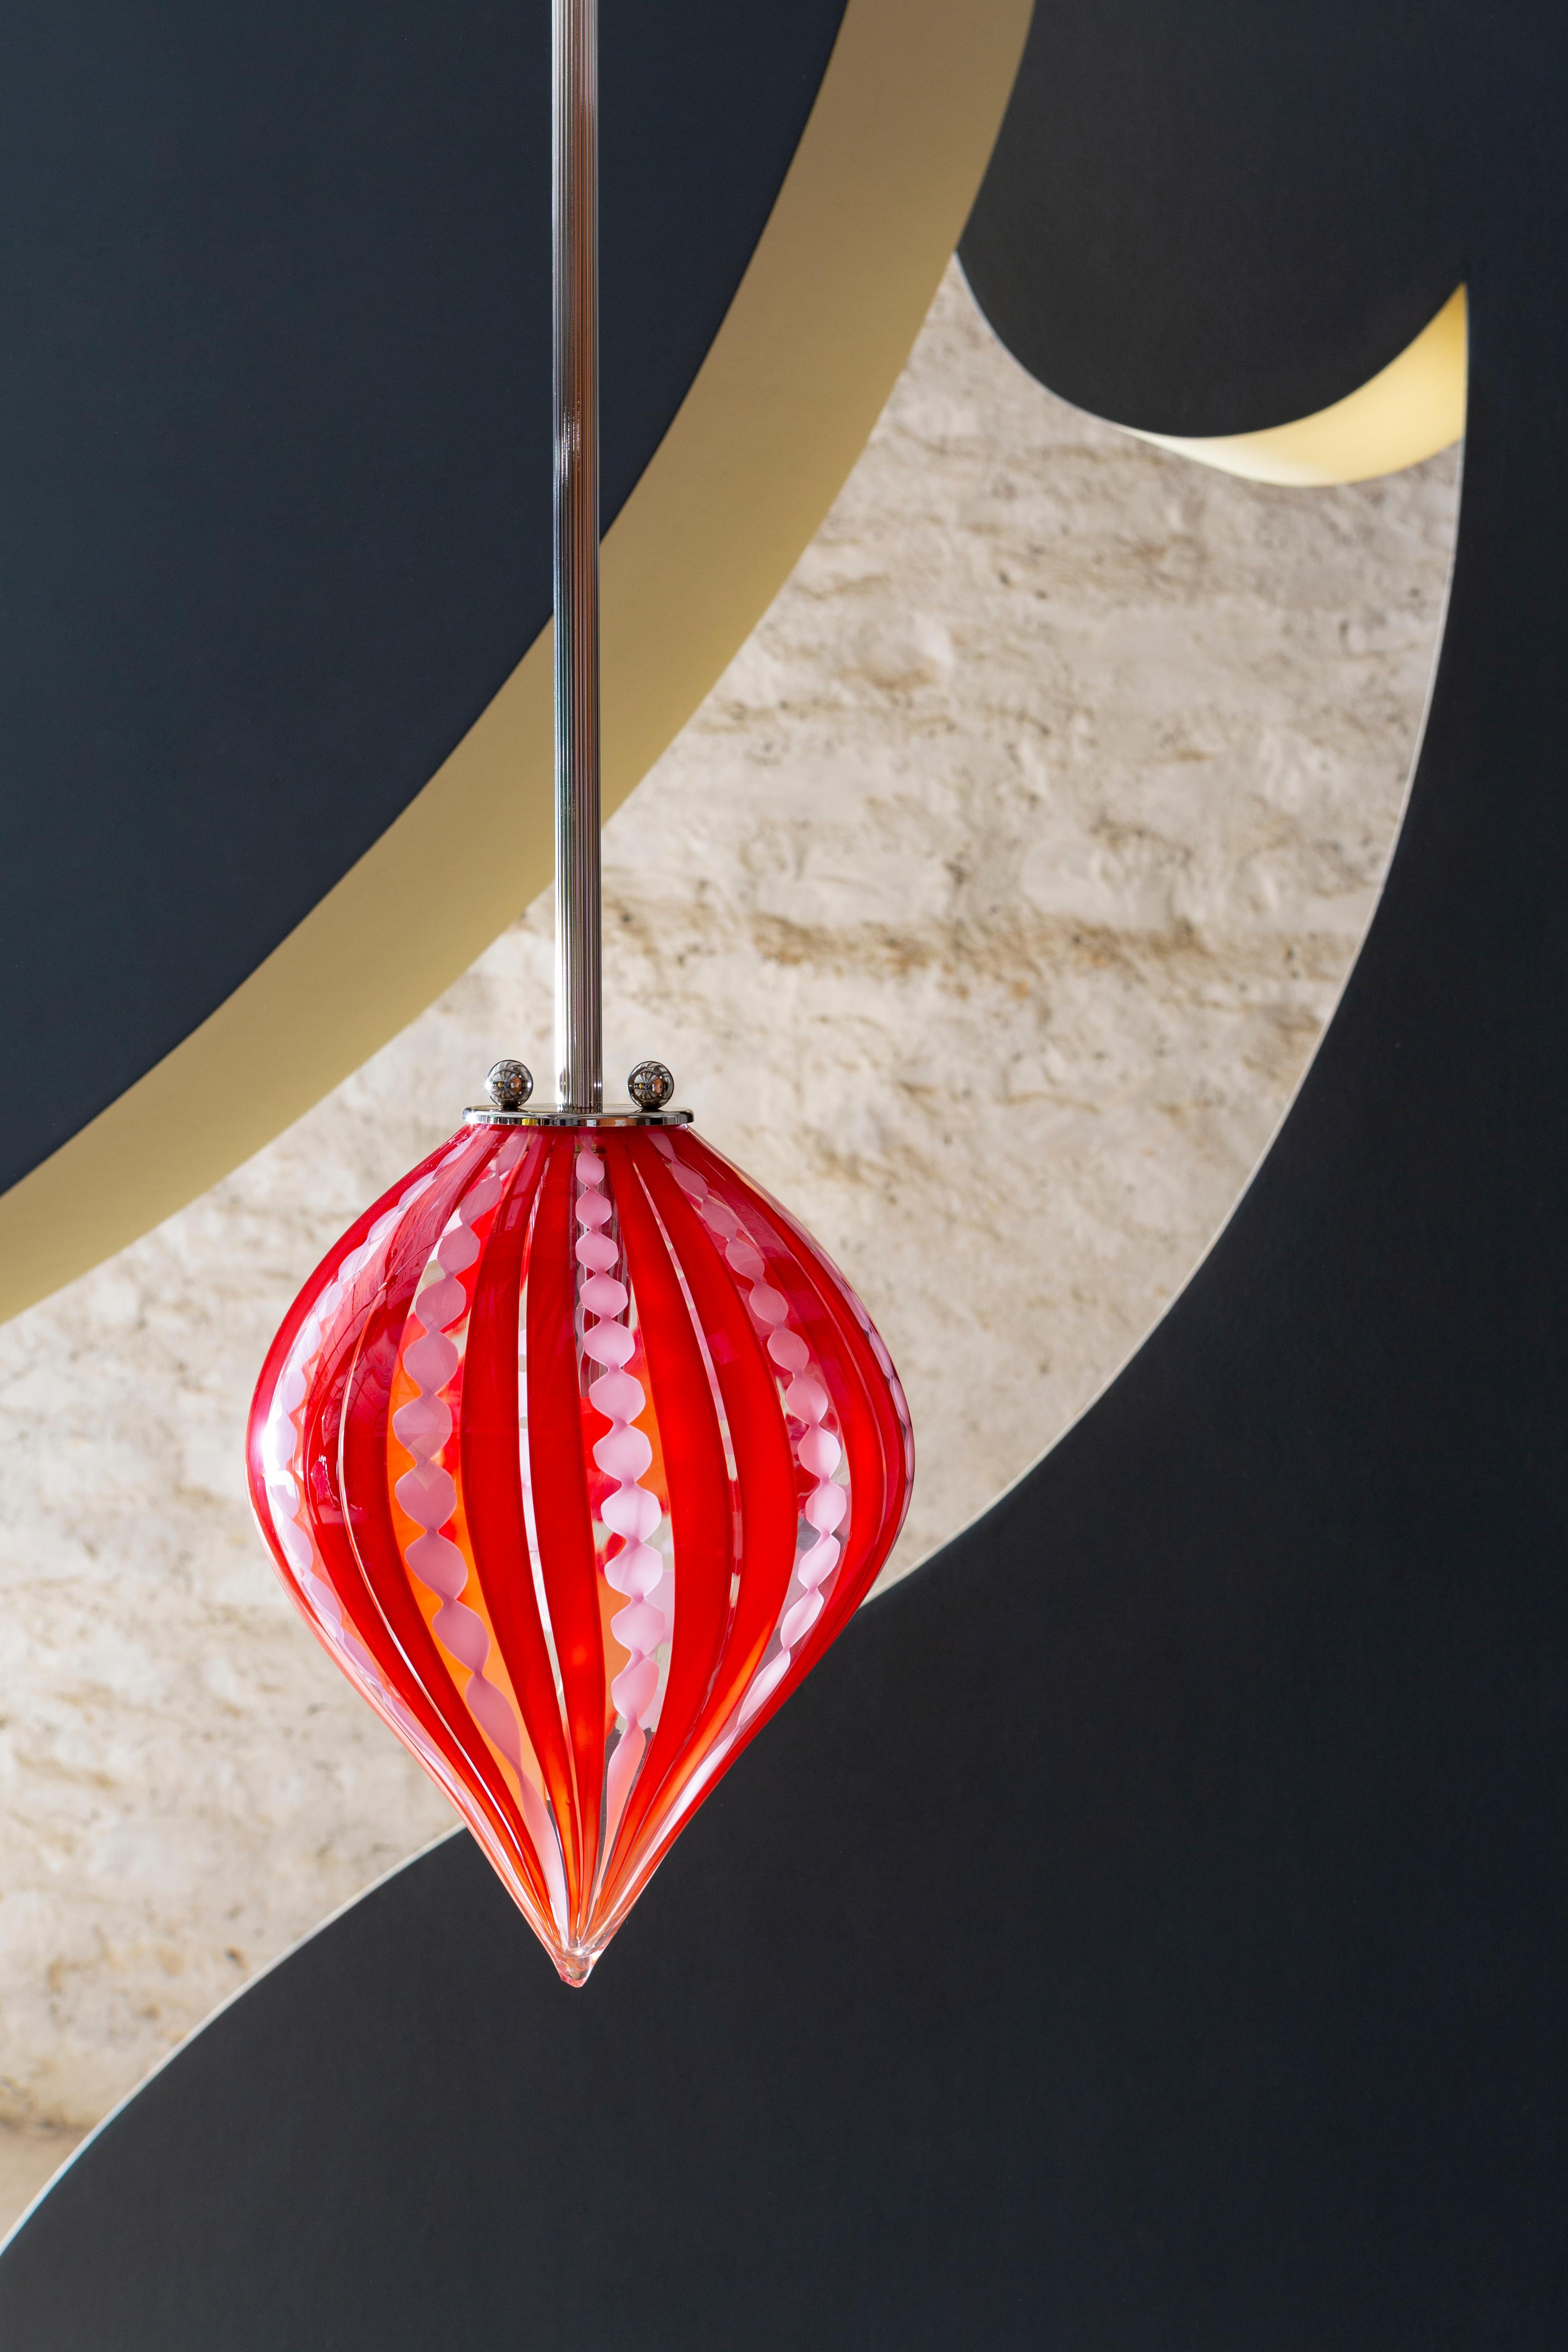 Spirale Balloon pendant light by Magic Circus Editions
Dimensions: H 36 + rod length to order x W 27 cm
Glass height: 36 cm
Materials: Fluted brass, mouth blown glass
Available finishes: Brass, Nickel

All our lamps can be wired according to